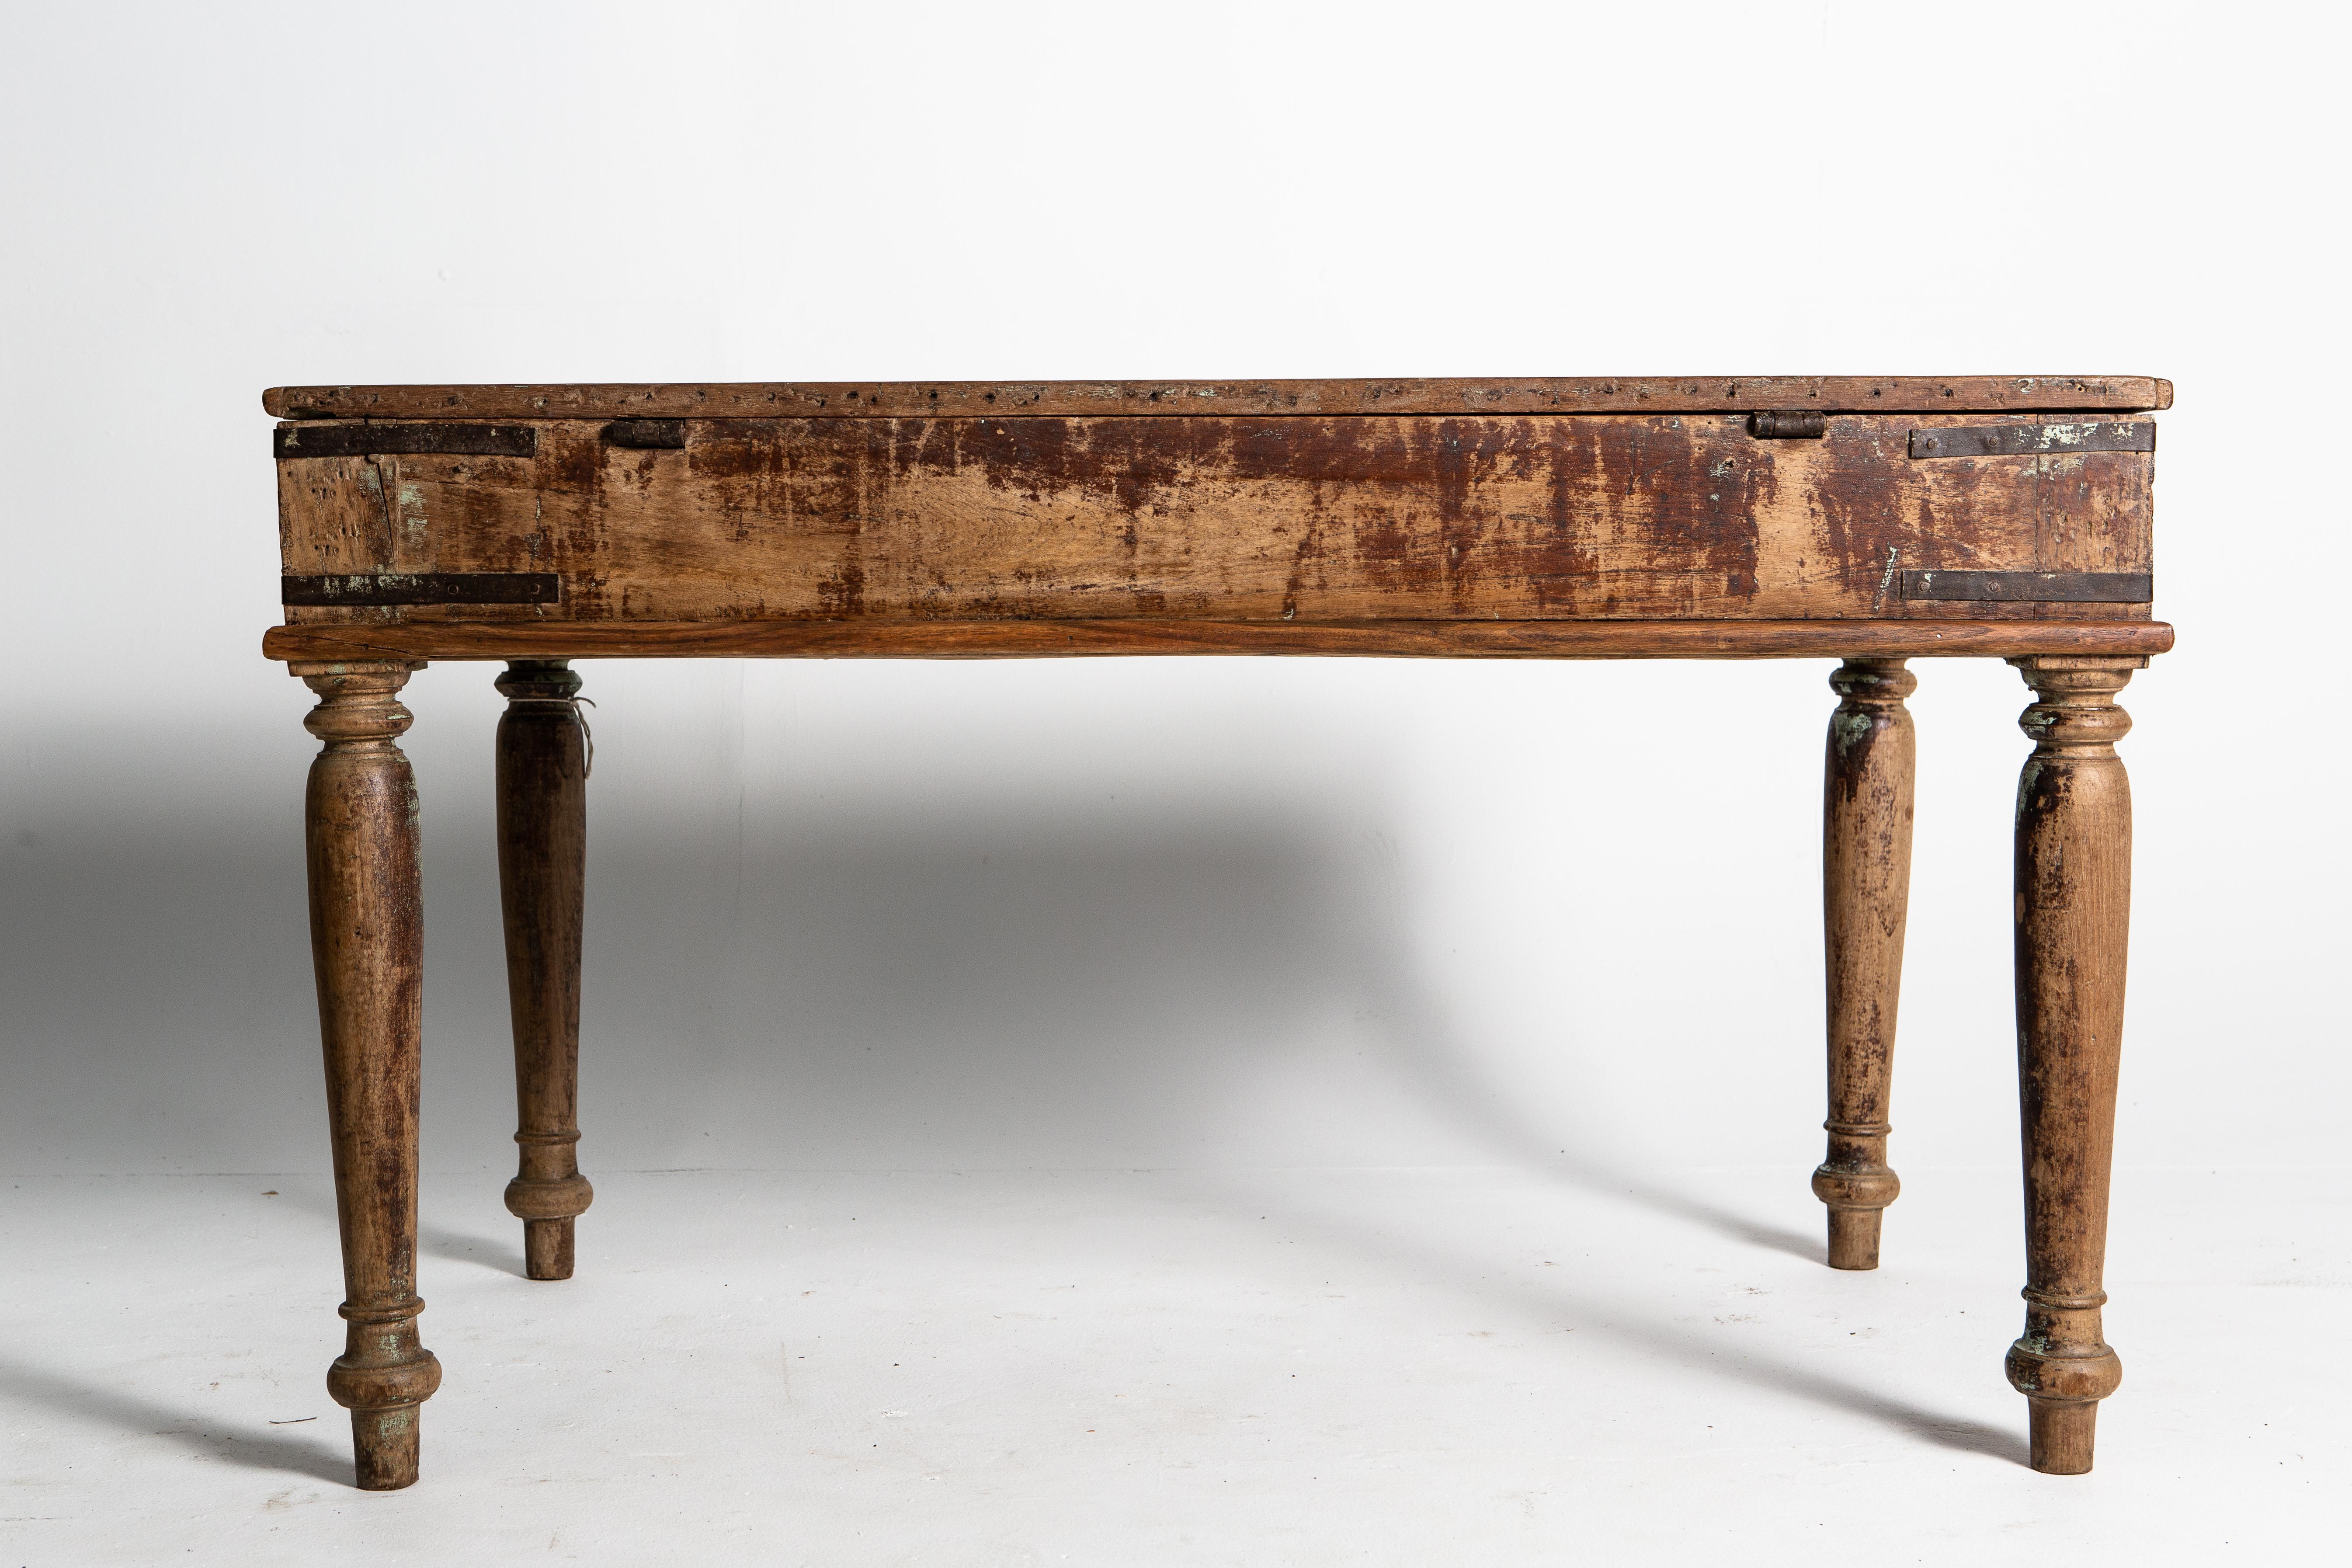 This rustic desk is made of teak and has remnants of its original patina still visible. The piece has wear consistent with age and use.